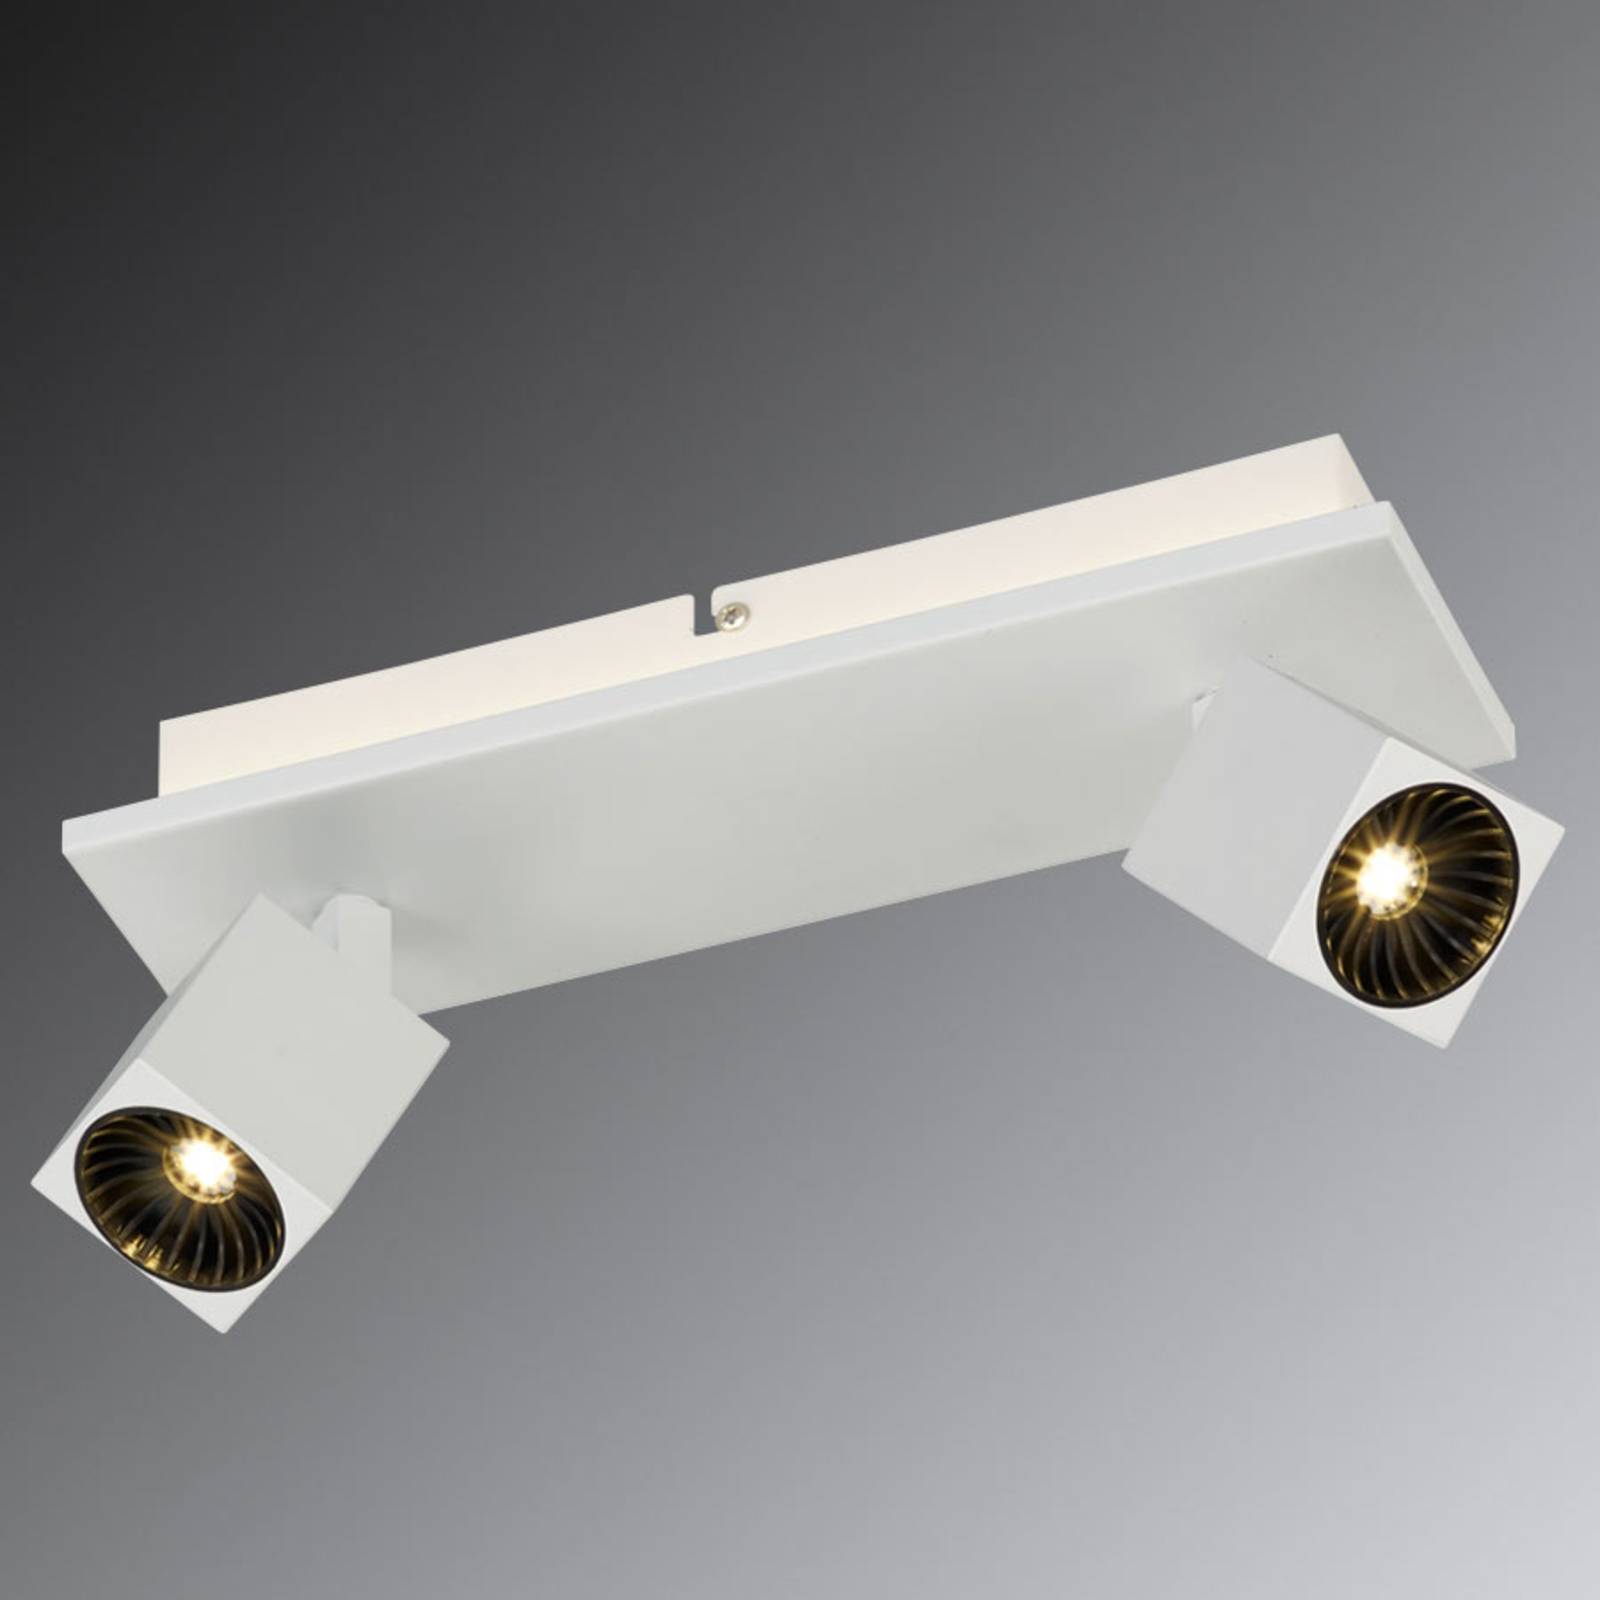 Variable Cuba LED ceiling light with Osram LEDs